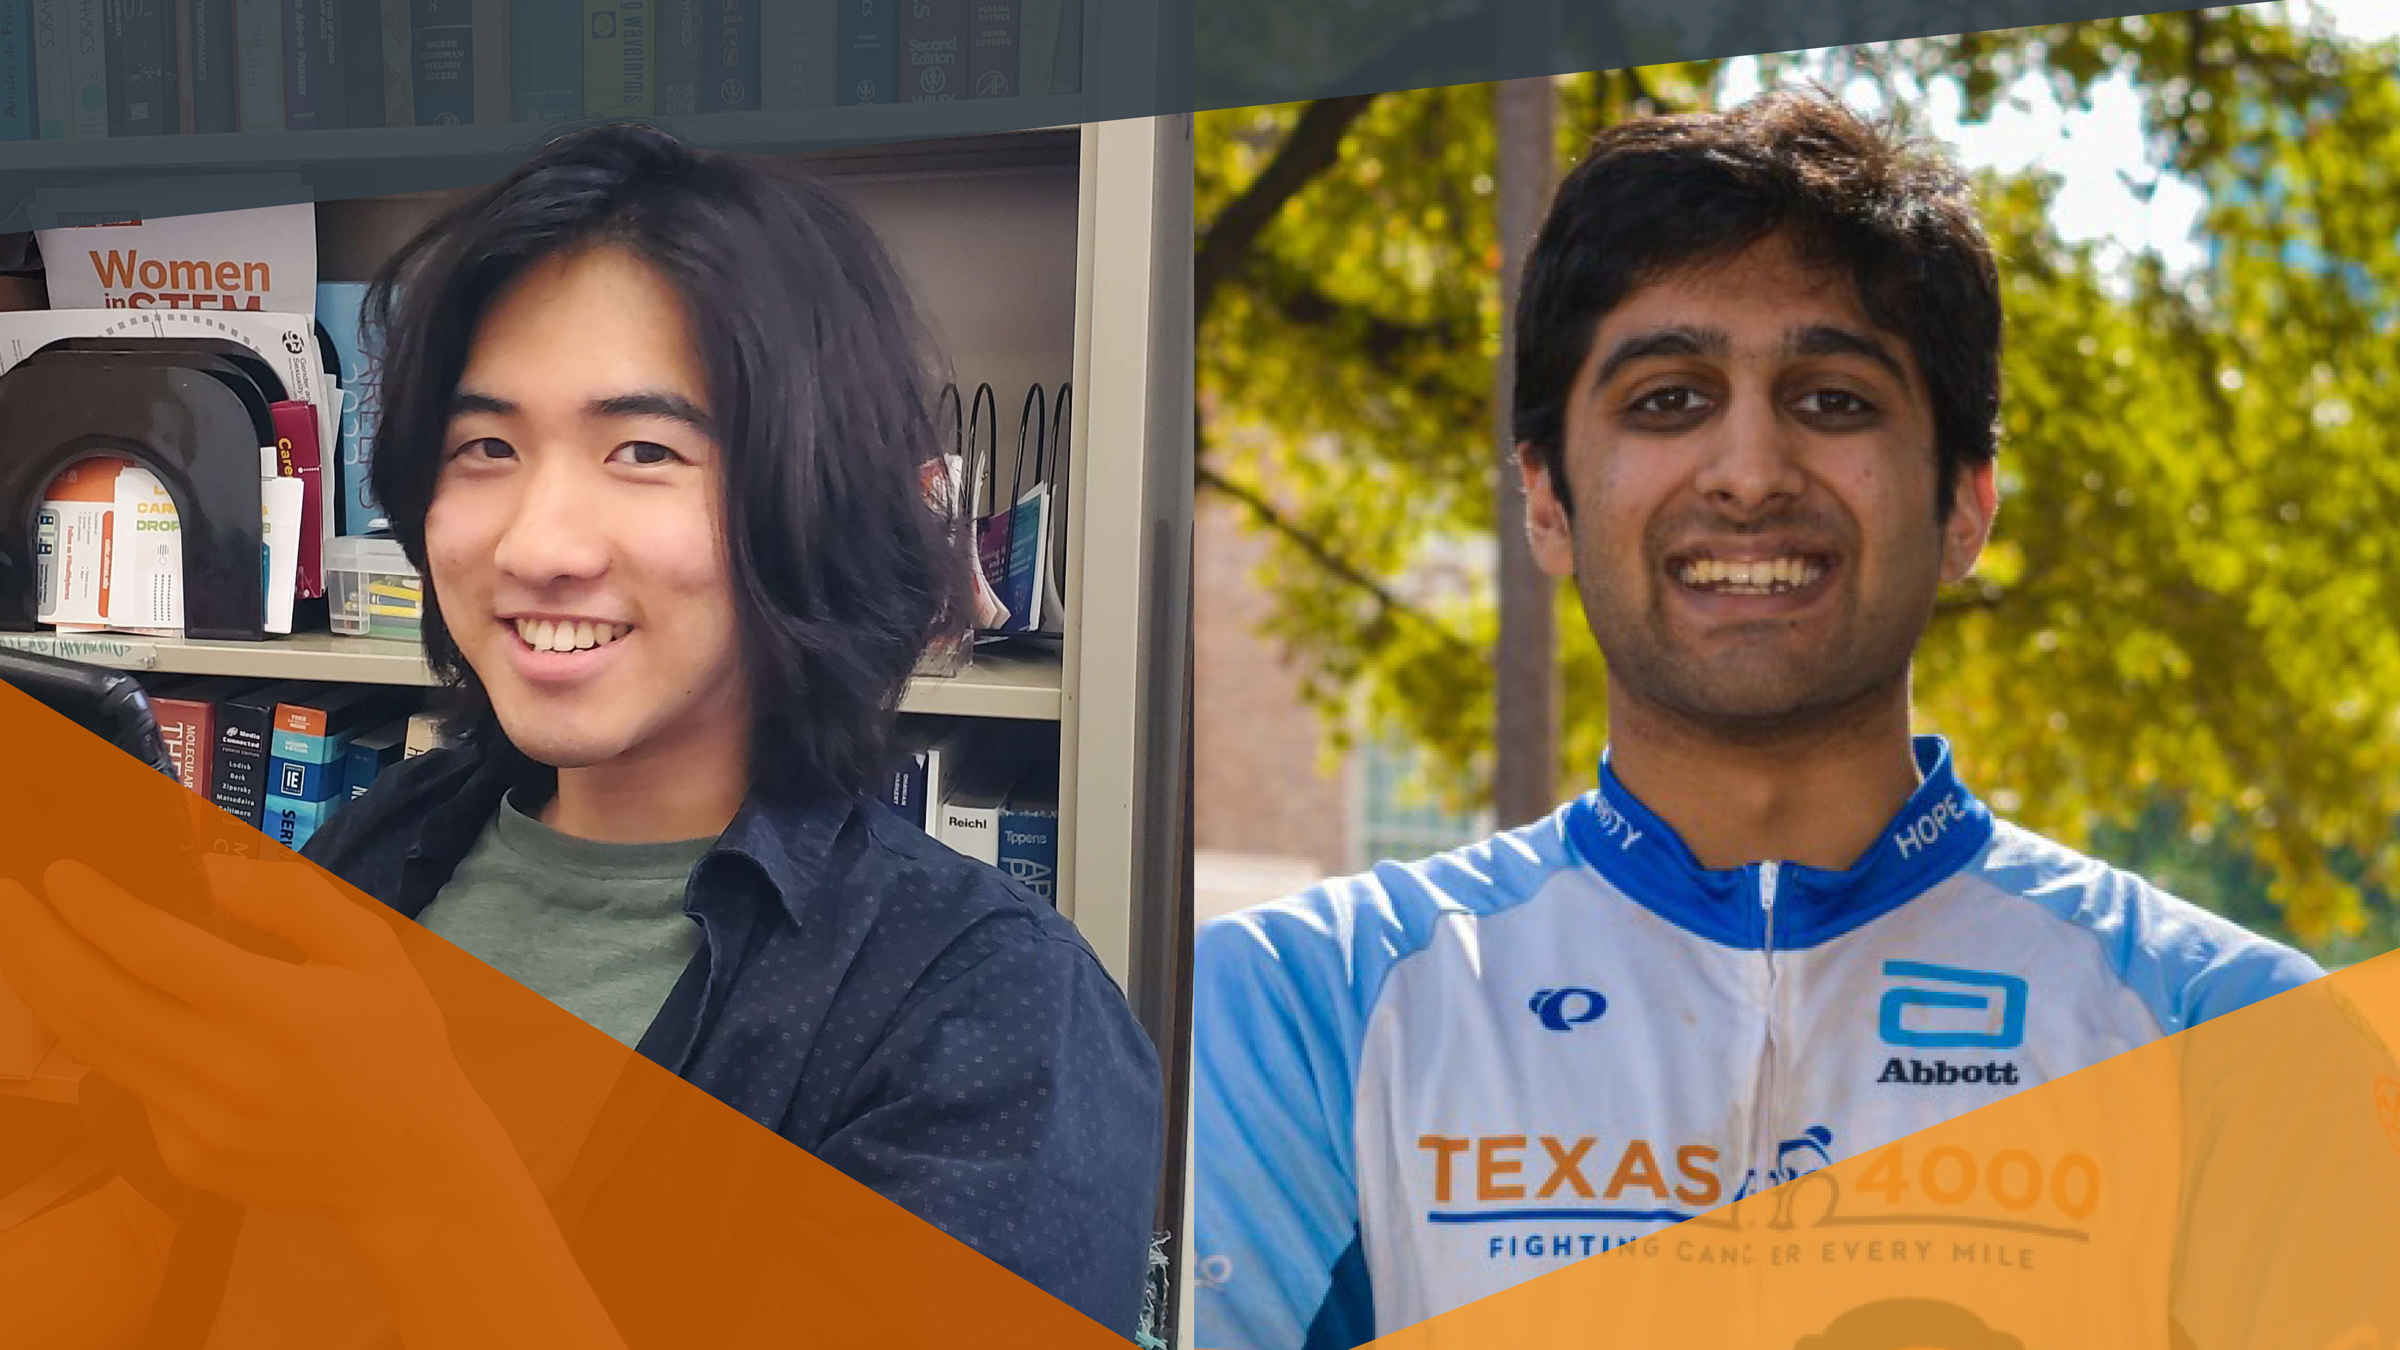 A collage of two students smiling with geometric graphics as an overlay. One student wears a jacket and stands in front of a bookshelf. The other wears Texas 4000 bicyclist gear outside.